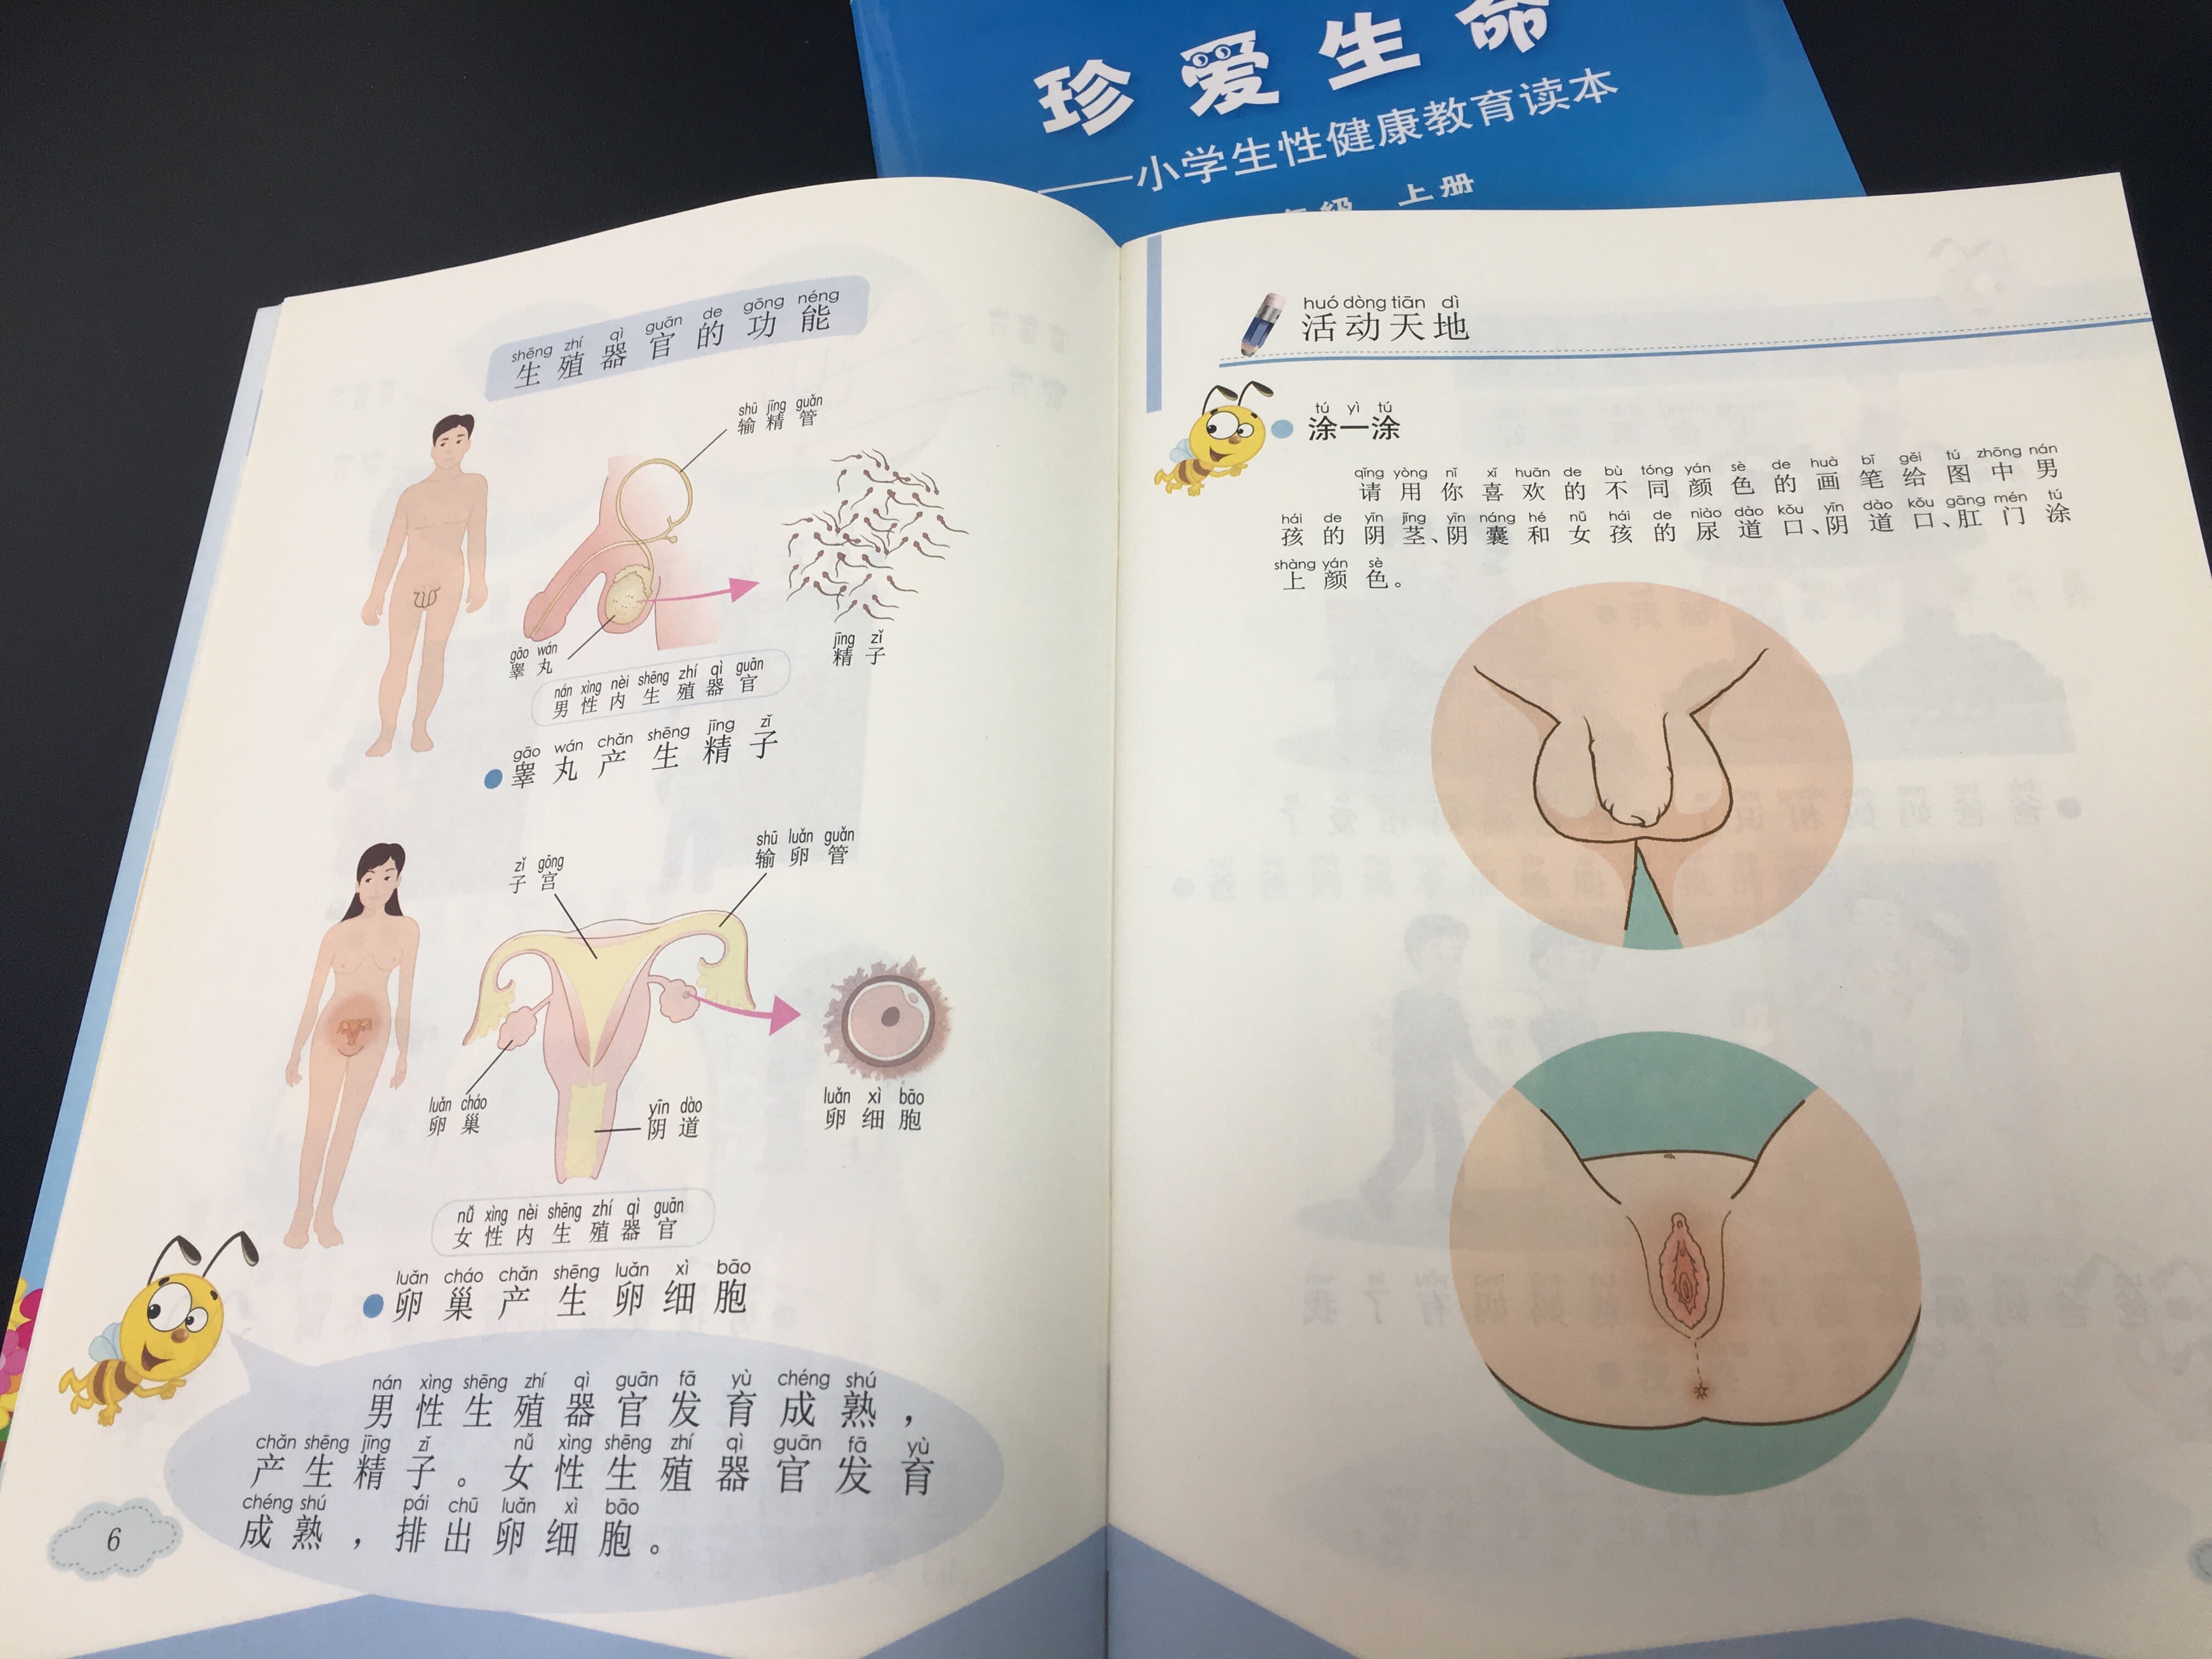 Asian Sex School - Shock and praise for groundbreaking sex-ed textbook in China | CNN